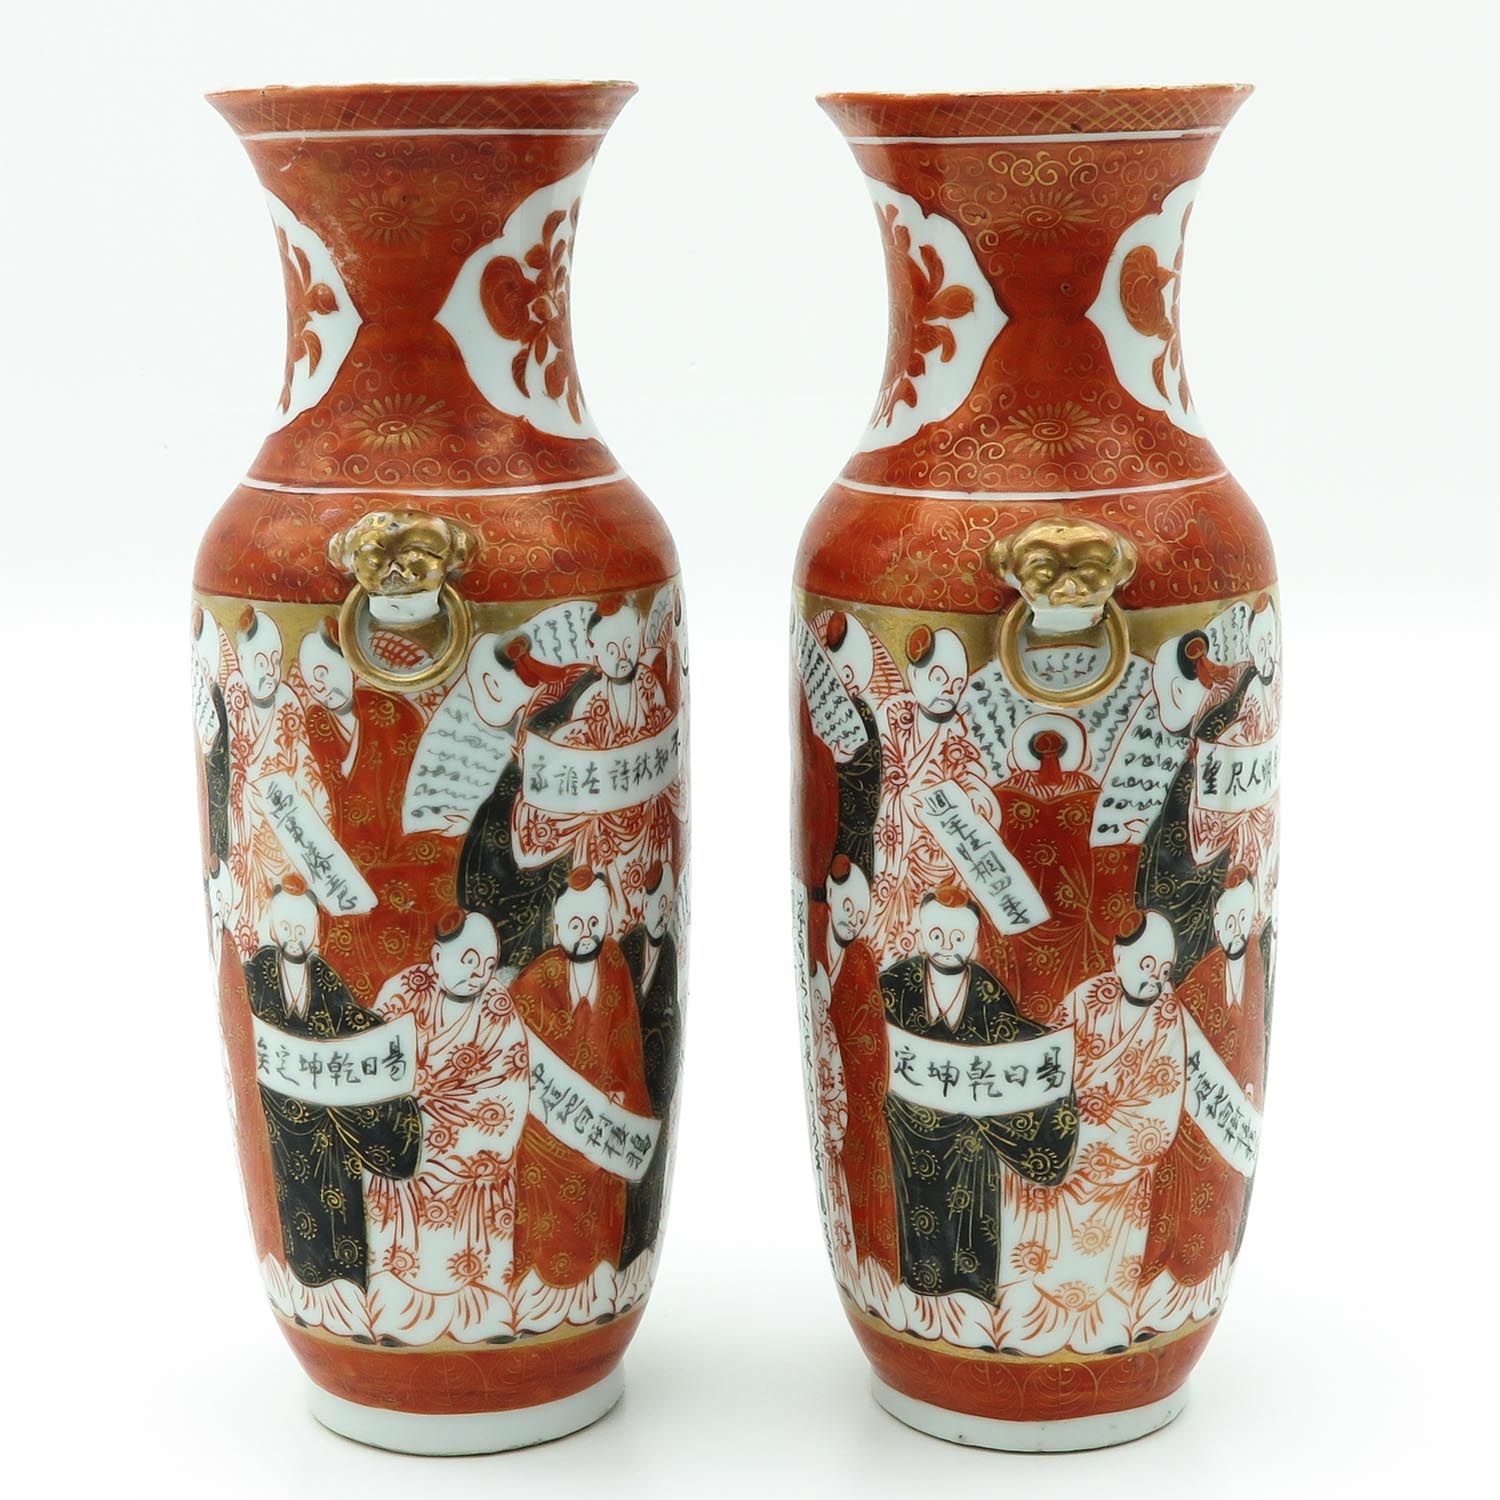 A Pair of Orange and Gilt Vases - Image 4 of 9